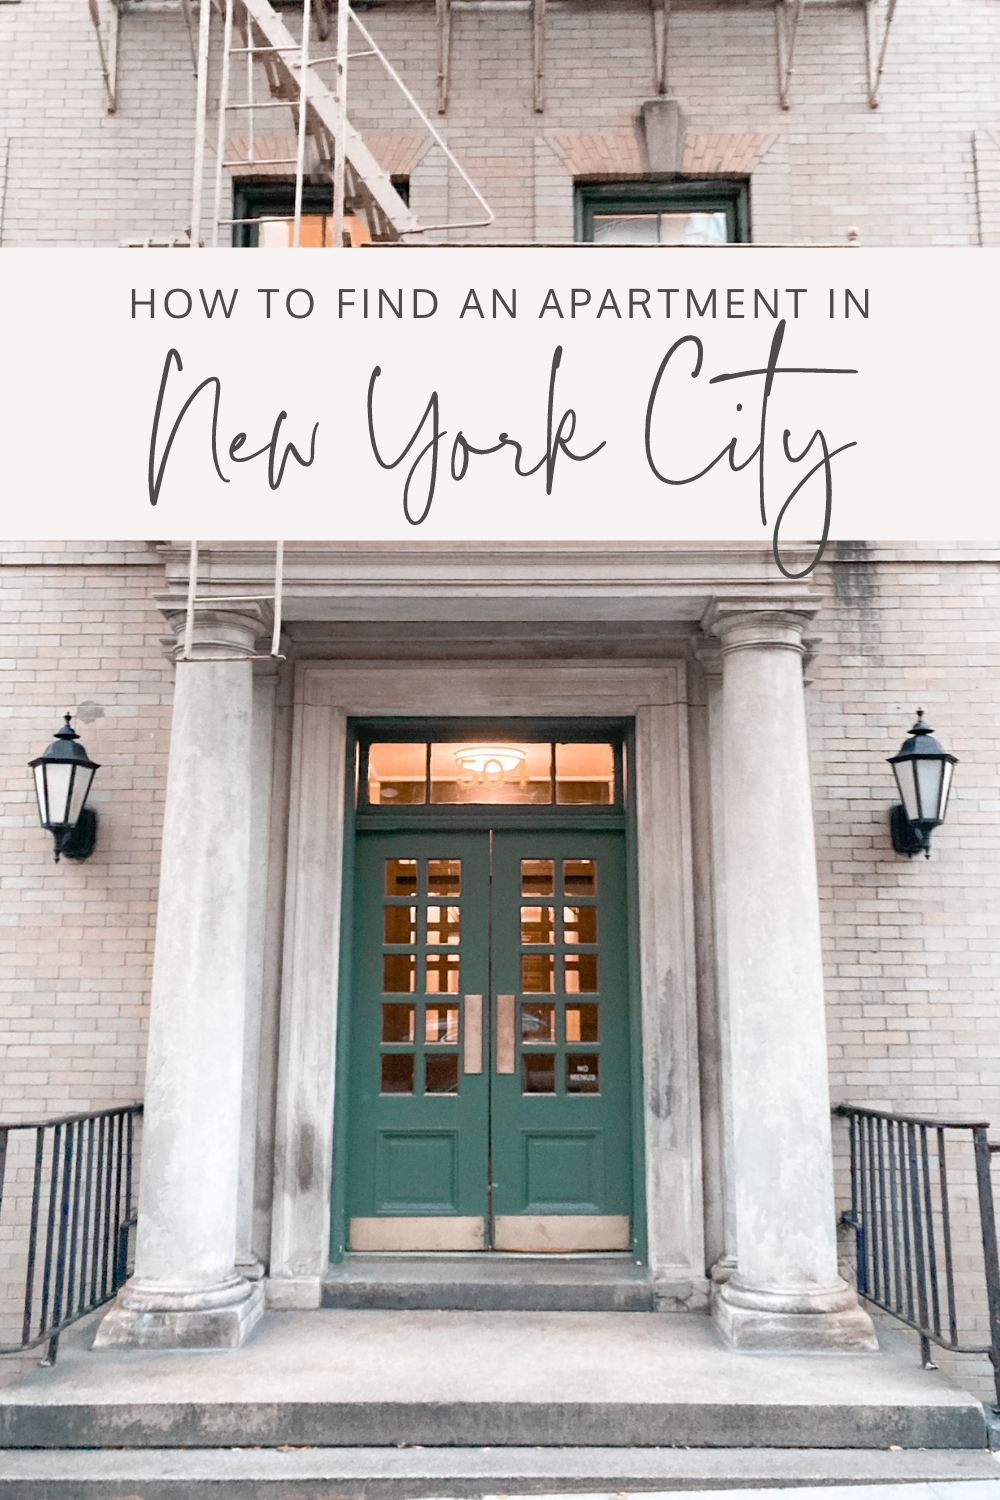 Find an Apartment in New York Pin